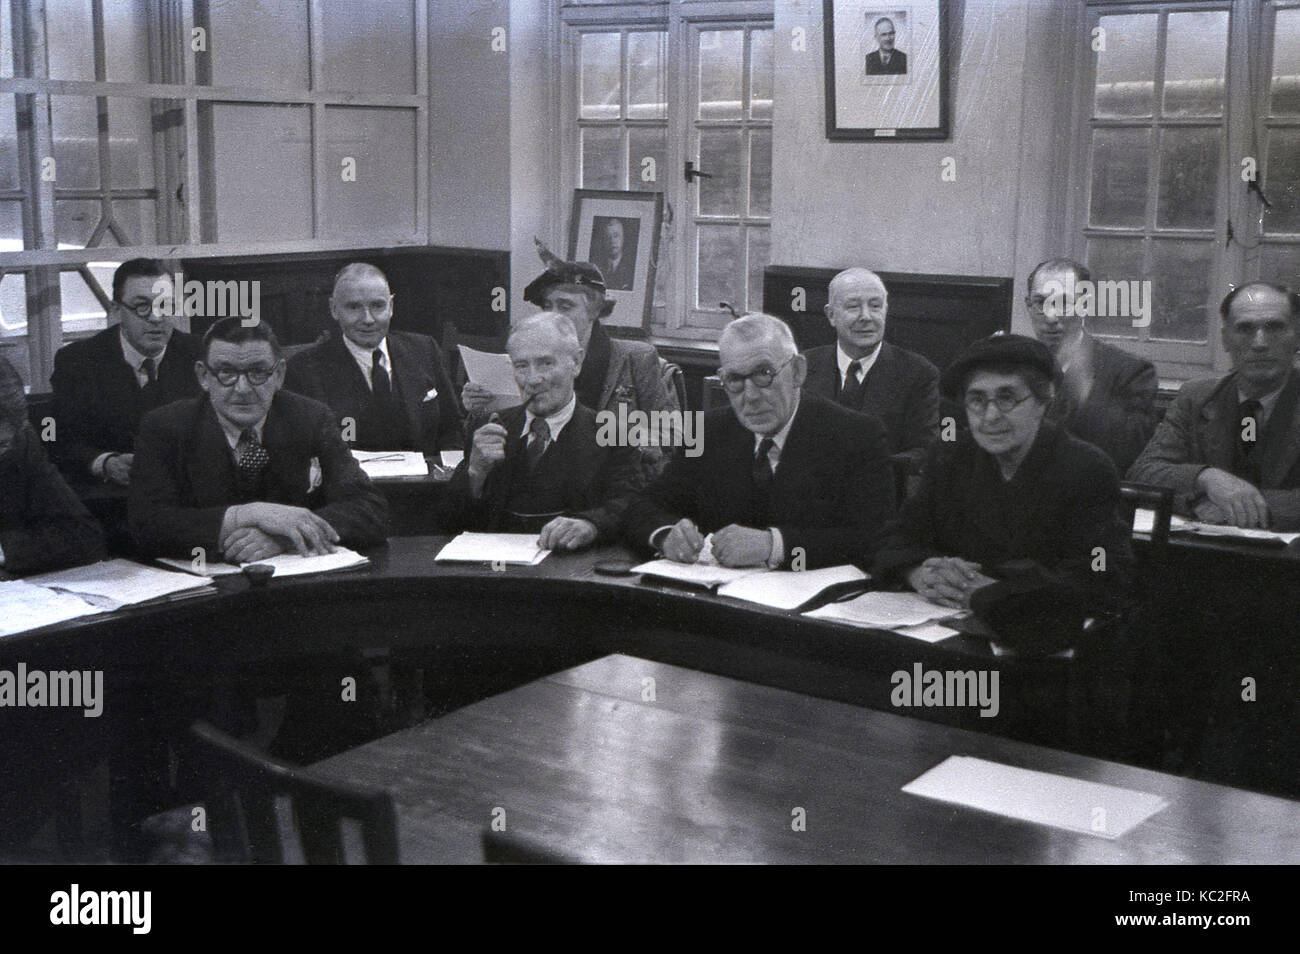 1960s, historical, smartly dressed local councilors sit behind circular desks with notes at a town council meeting, England, UK. Stock Photo